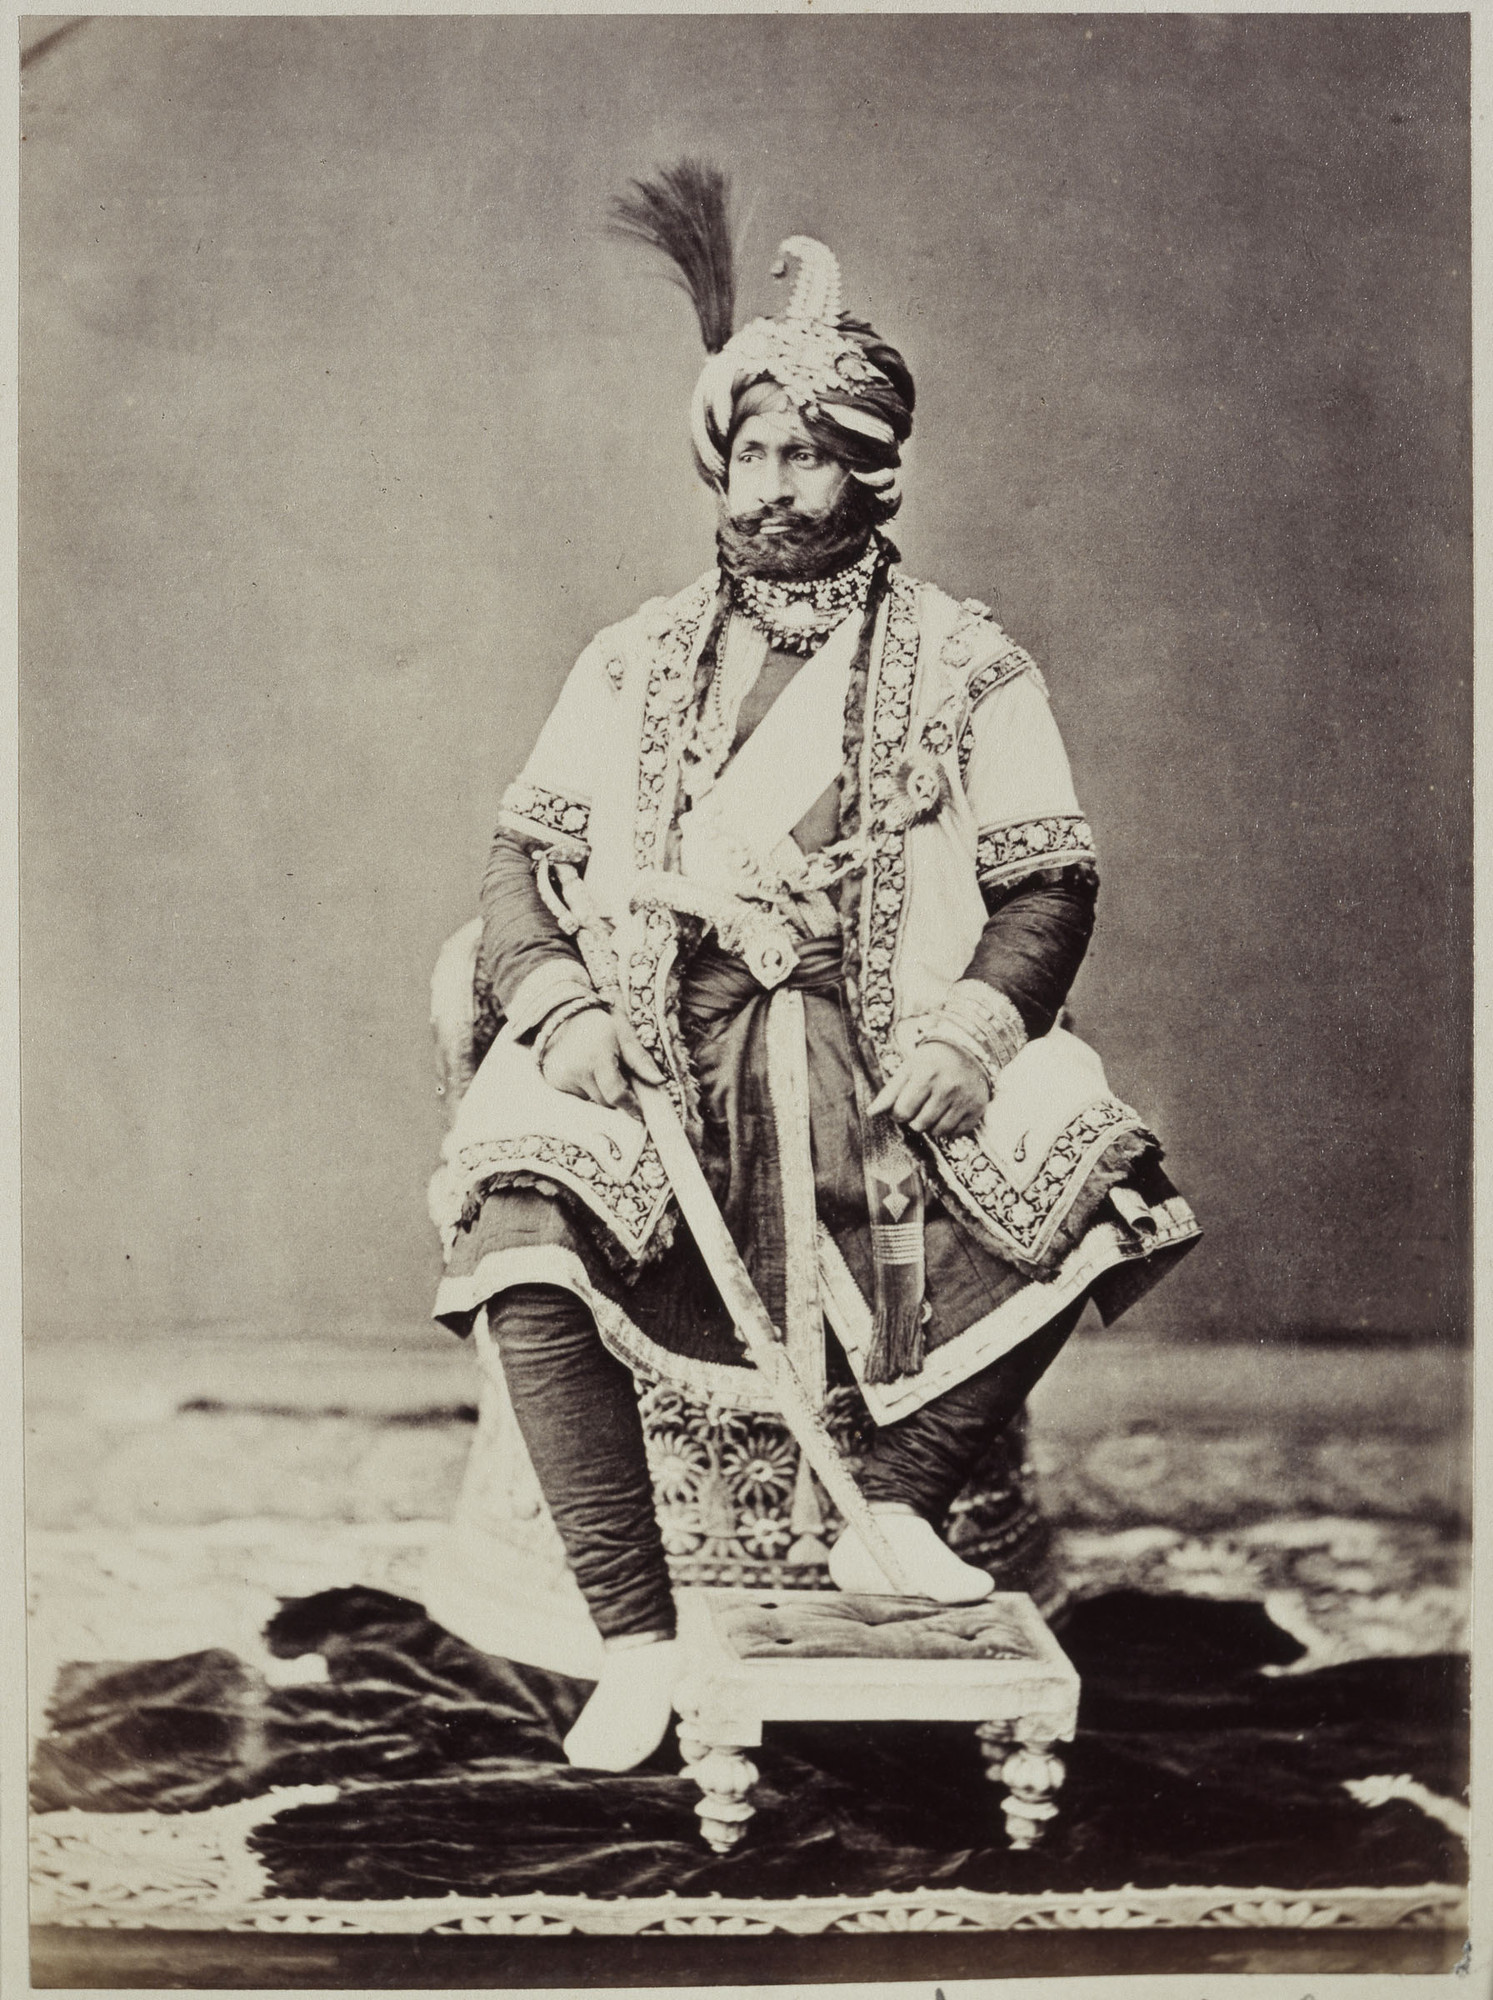 The British agreed to let Gulab Singh become the first Maharaja of Jammu Kashmir.